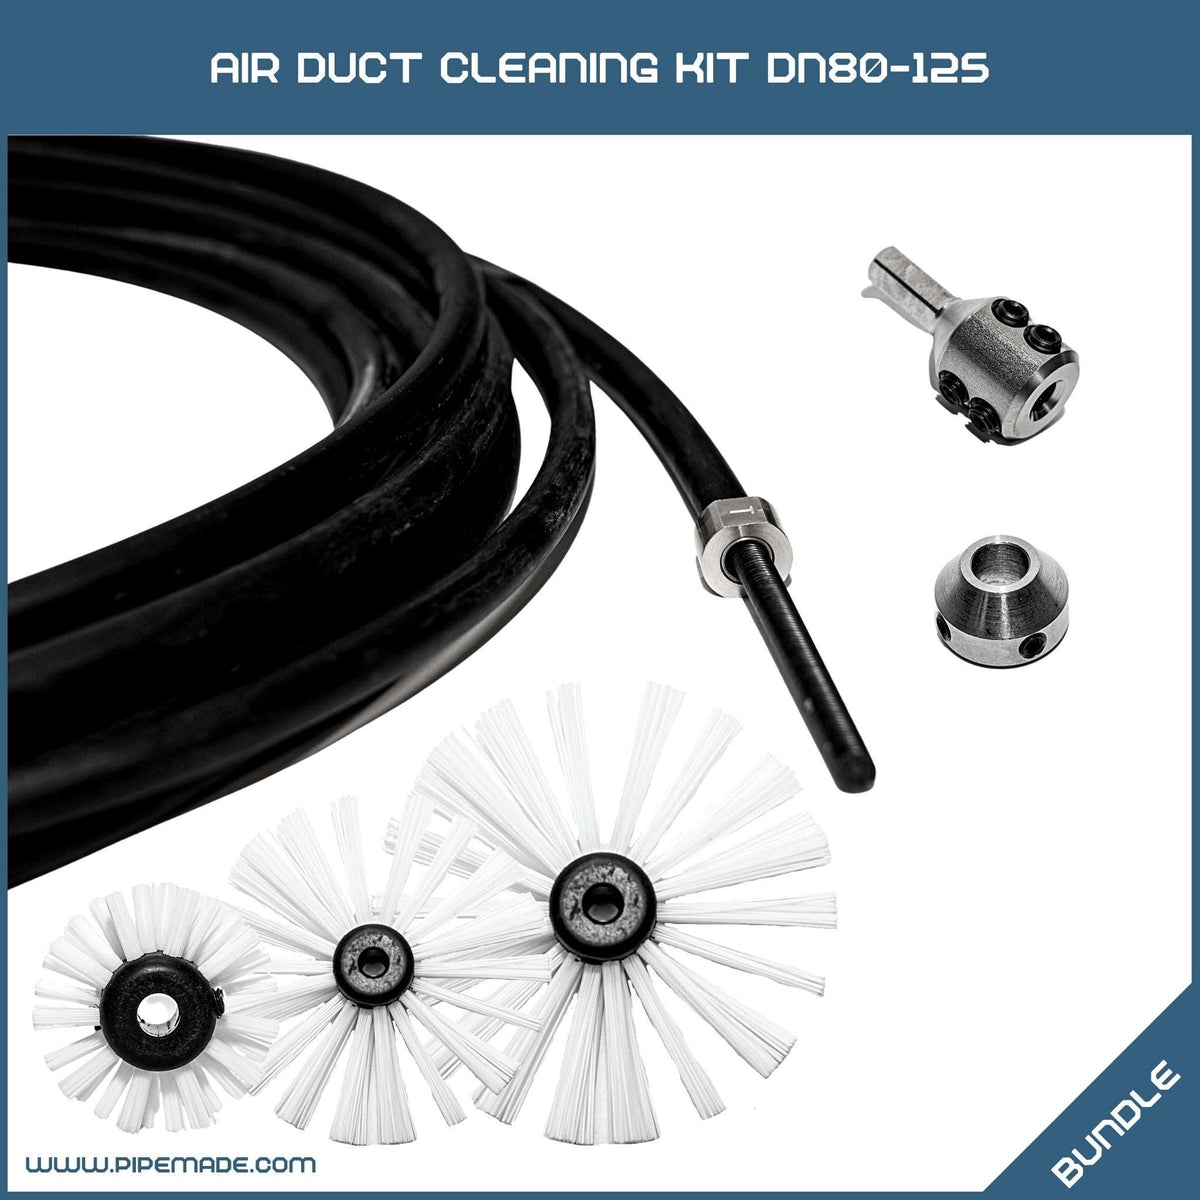 Air Duct Cleaning Kit DN80-125 | Cleaning Chains | Zewer | air-duct-cleaning-kit-dn80-125